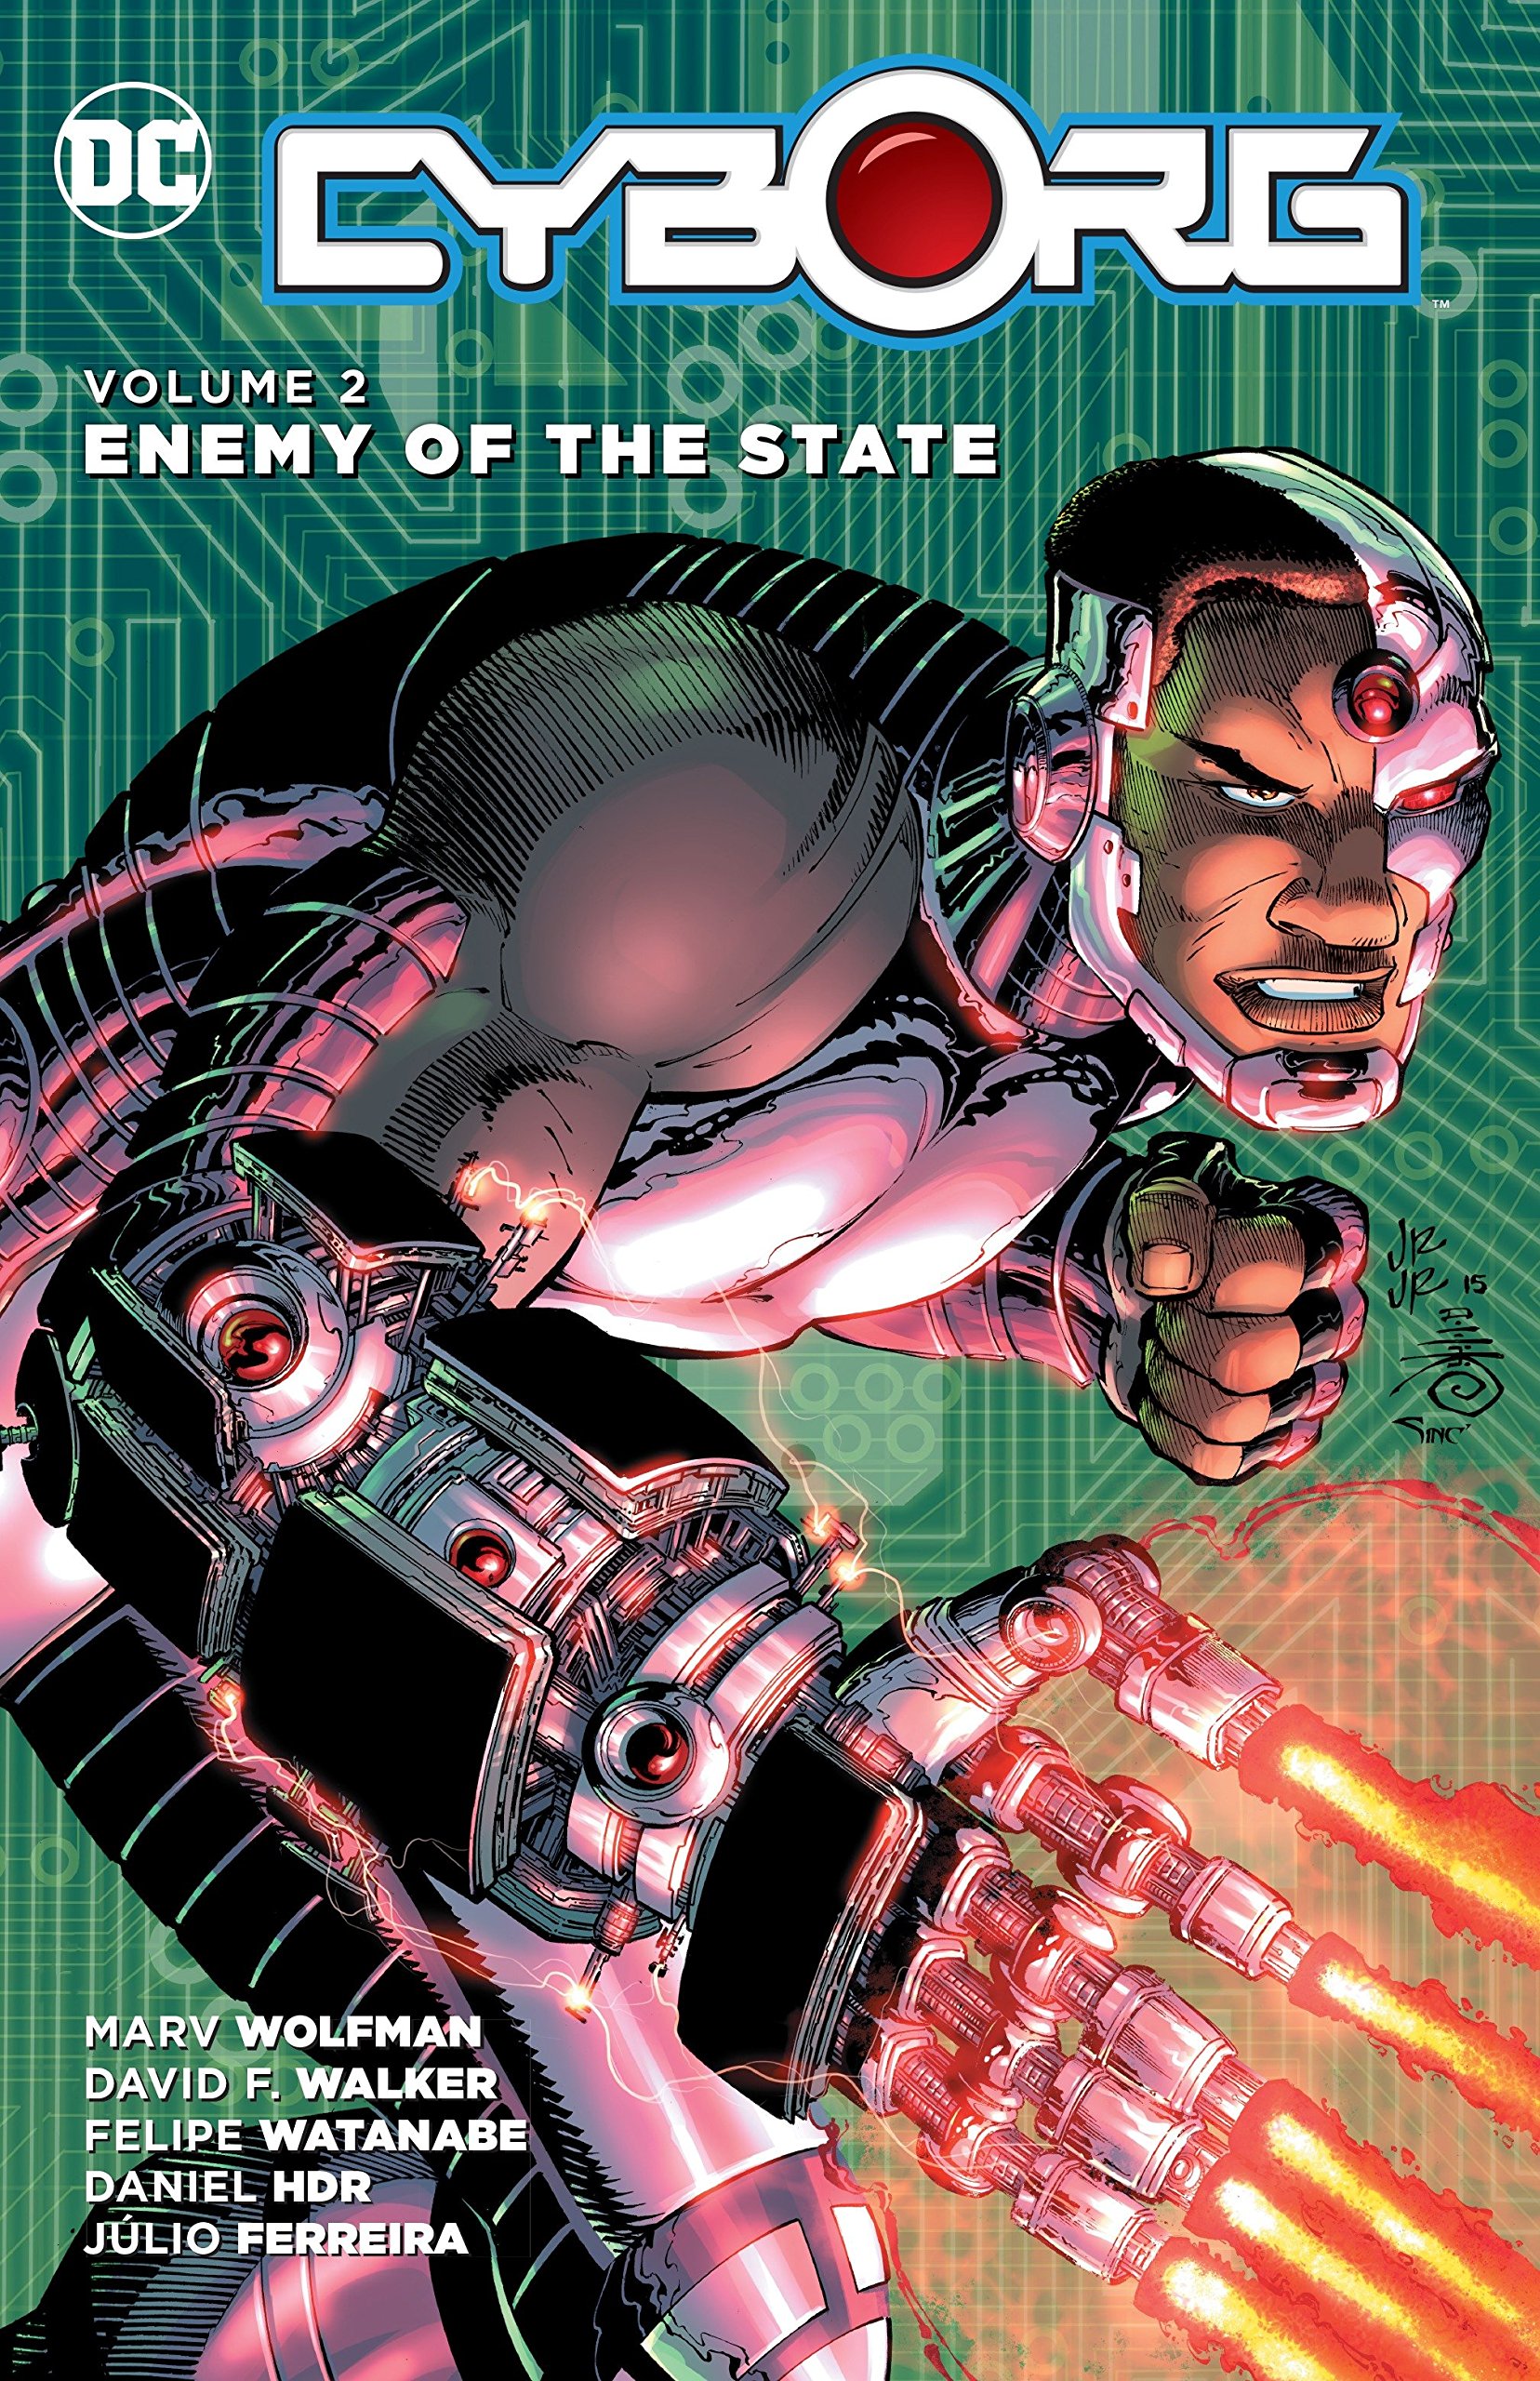 Cyborg Graphic Novel Volume 2 Enemy of the State